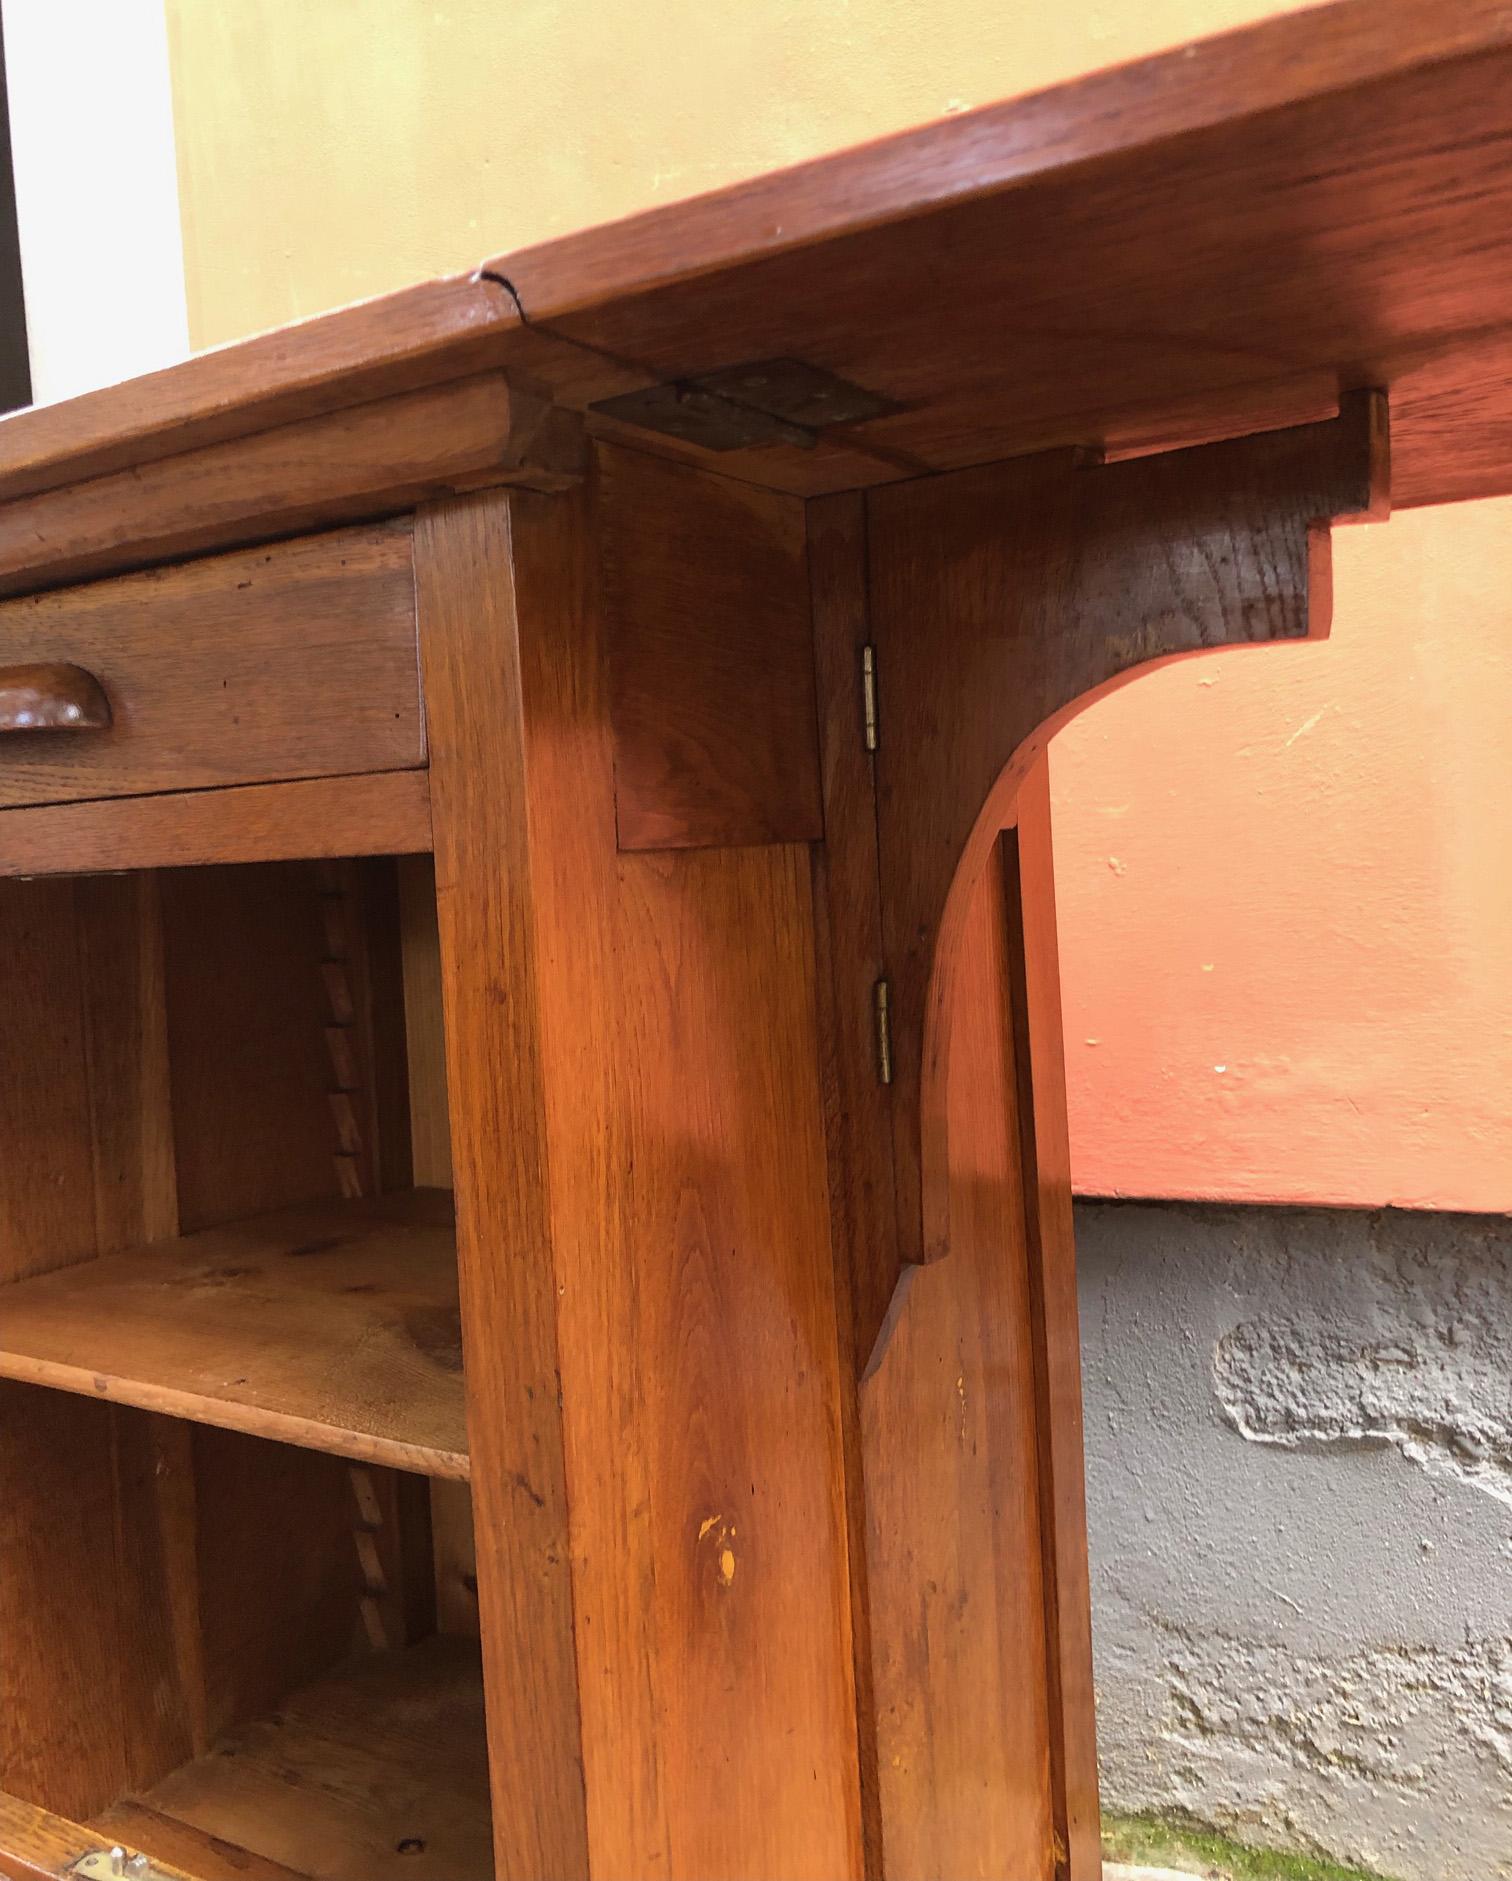 20th century sideboard table in solid oak with rolling shutter and internal top.
The right side part can be raised at will and a comfortable table is created.
Rare shape and size. The table when open measures 46 x 95 cm.
Very practical and